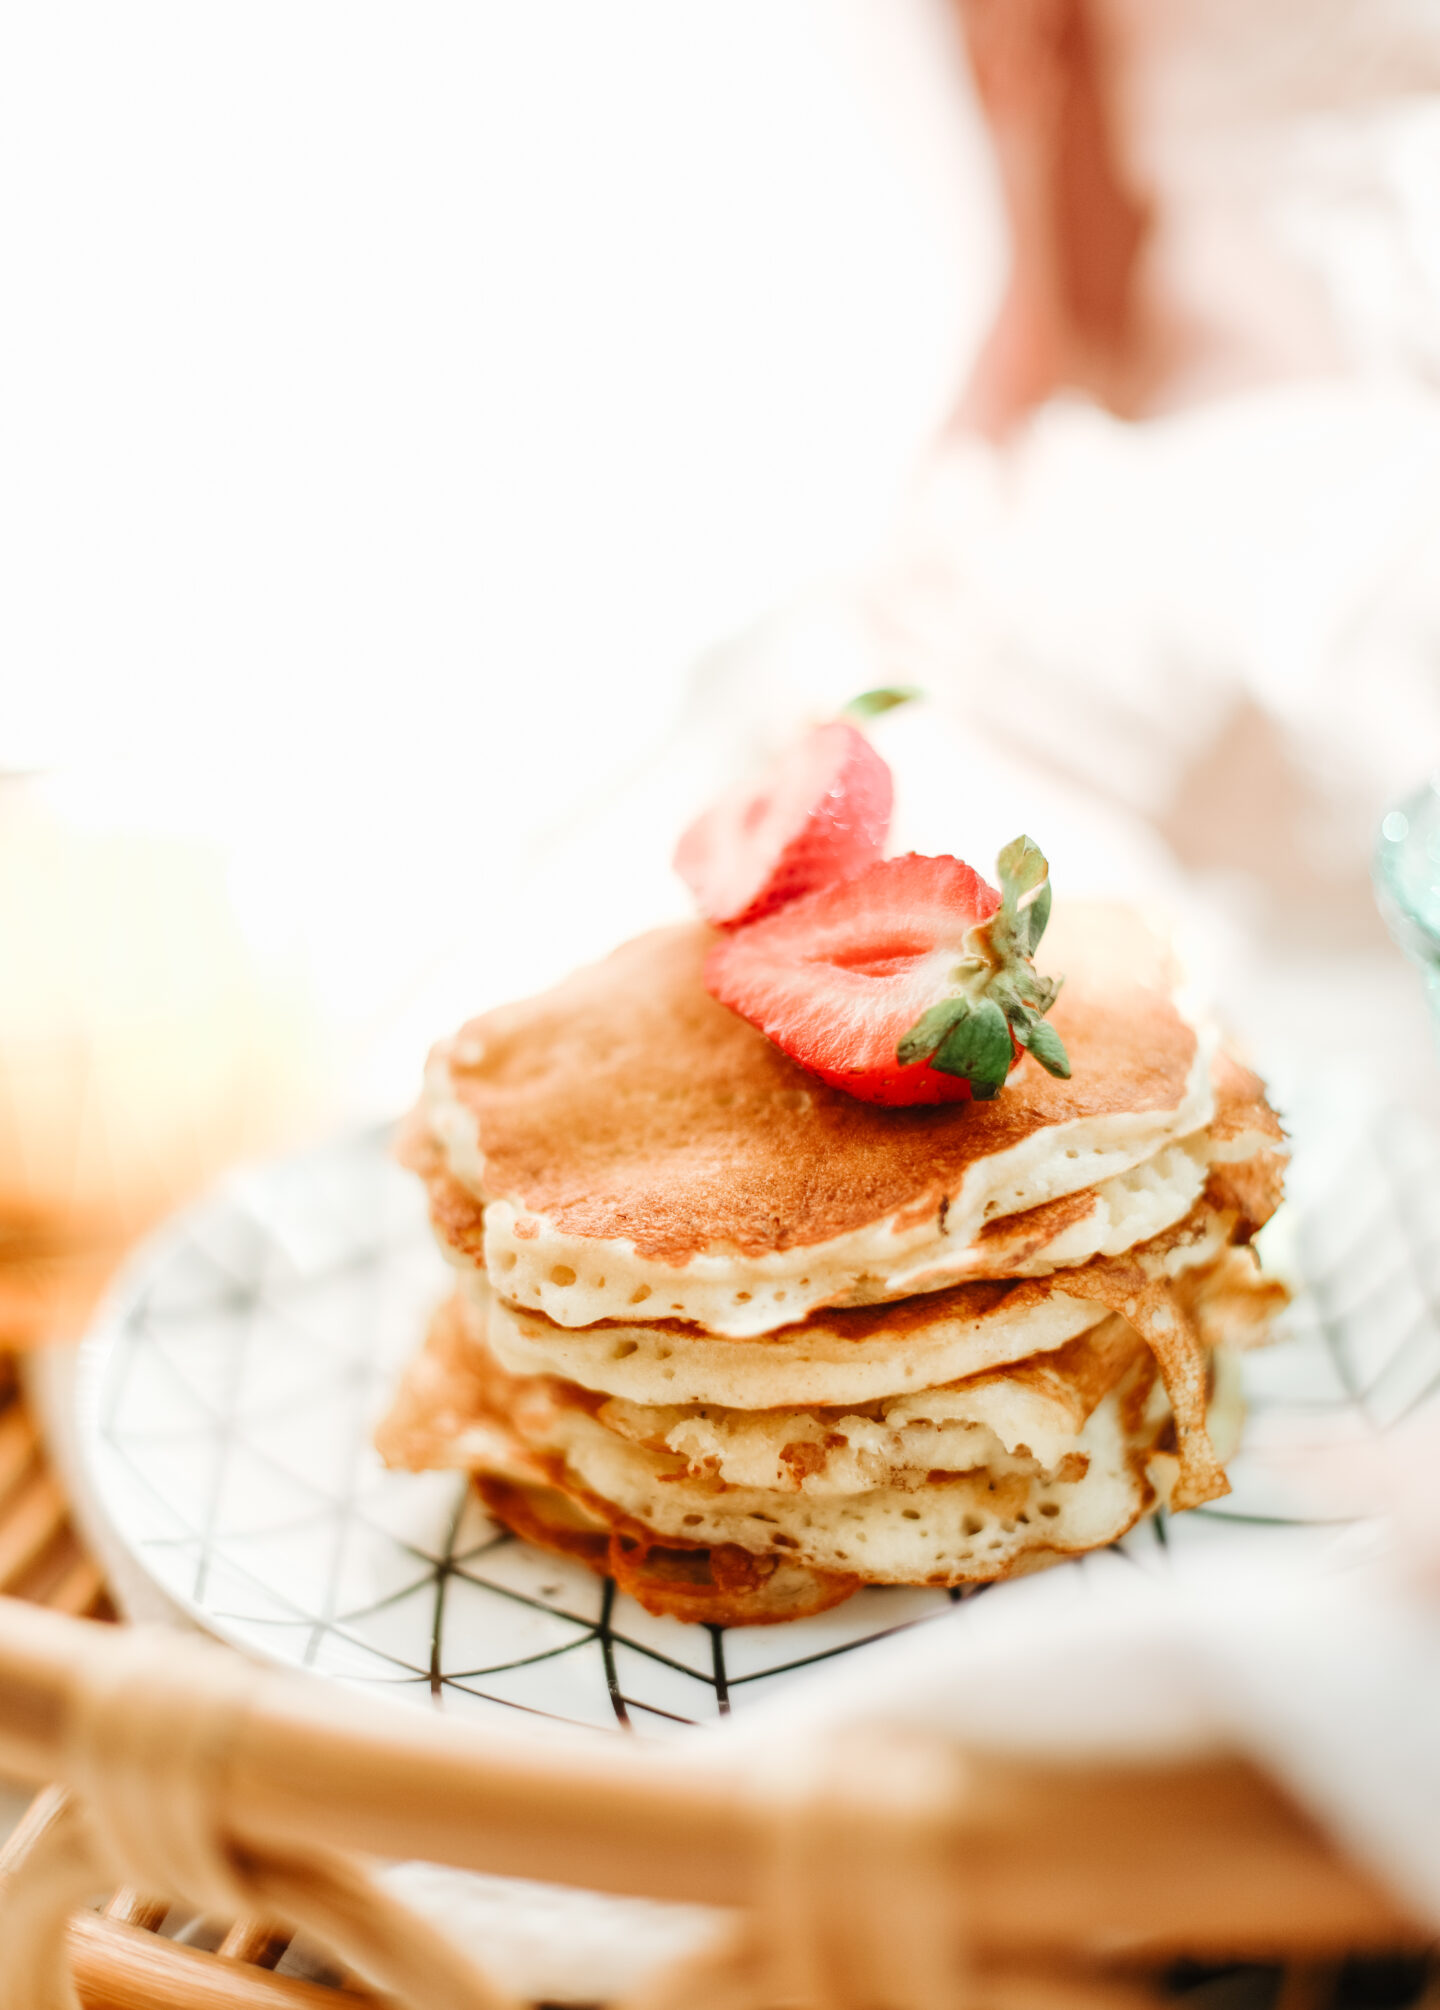 Best Fluffy Pancakes Recipe To Try at Home